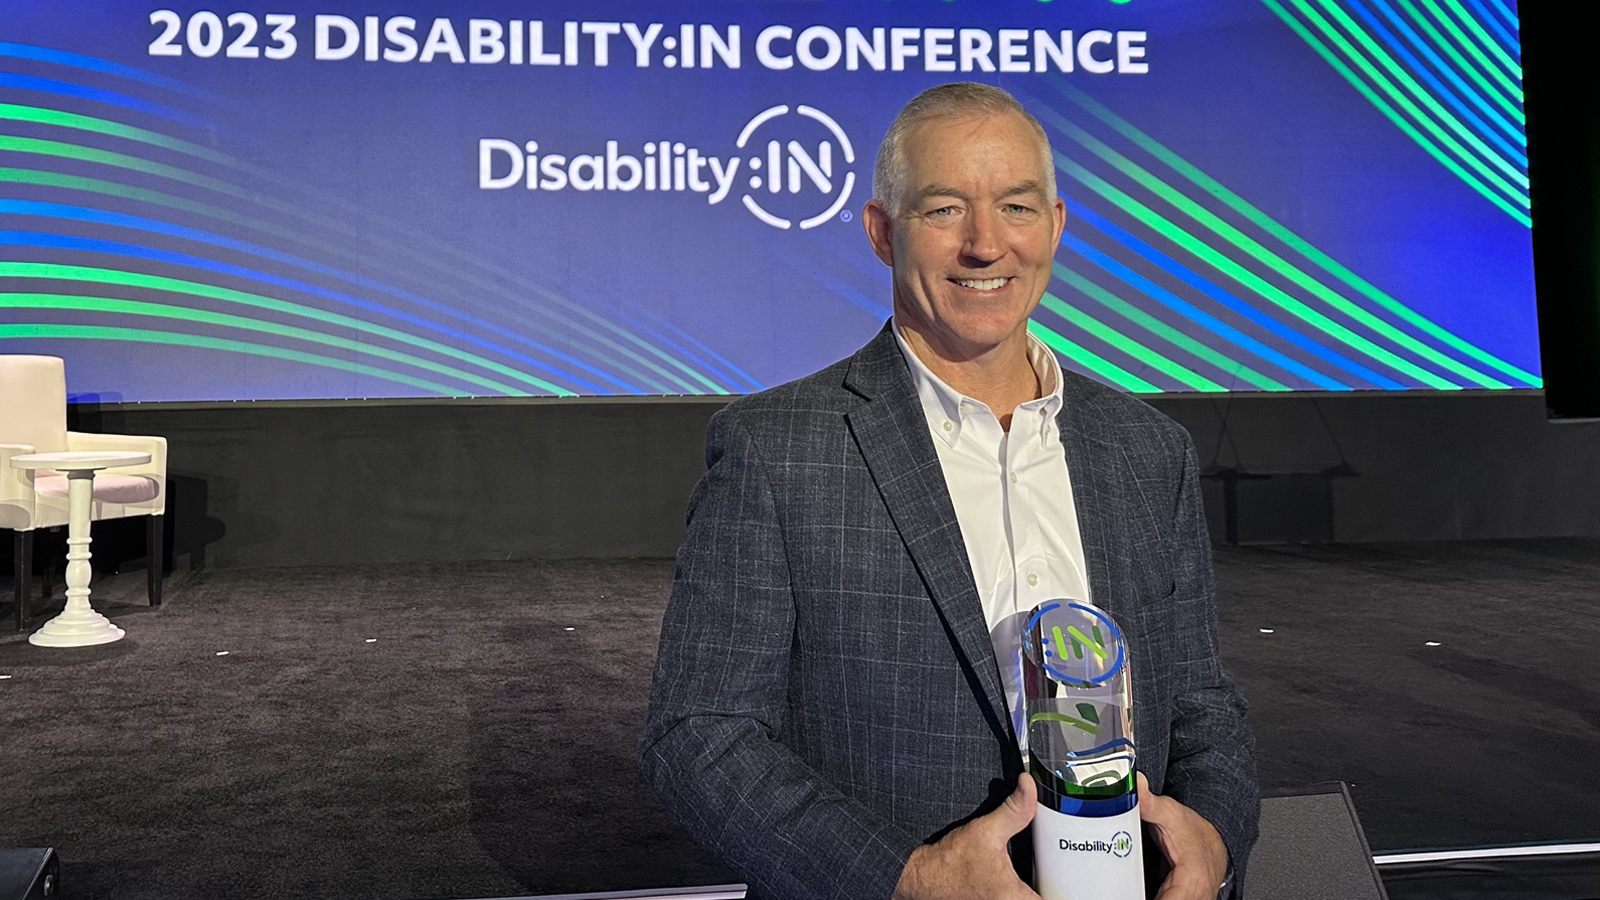 Rady Johnson at the 2023 disability:in conference